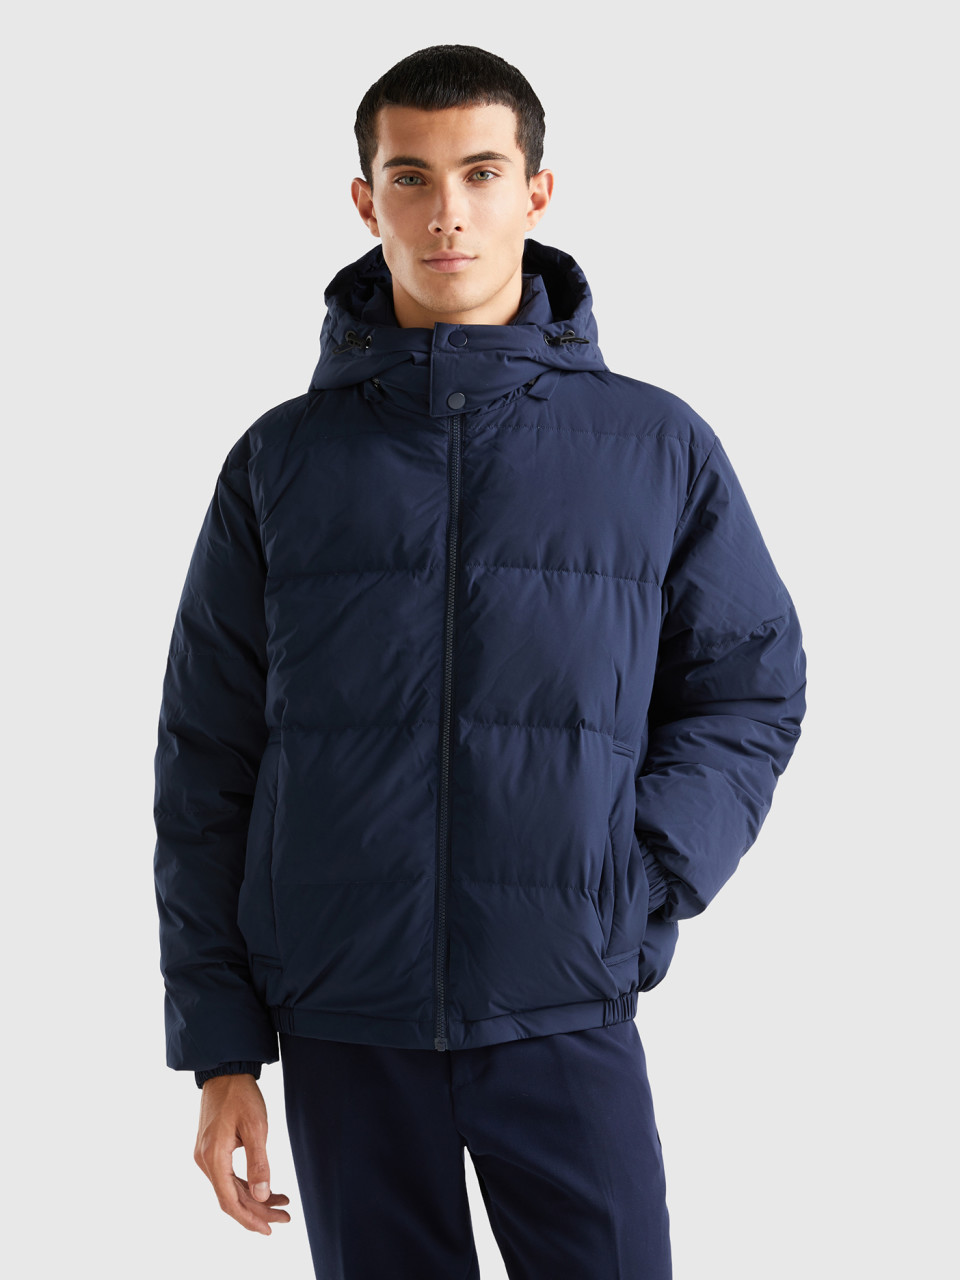 Benetton, Padded Jacket With Removable Hood, Dark Blue, Men